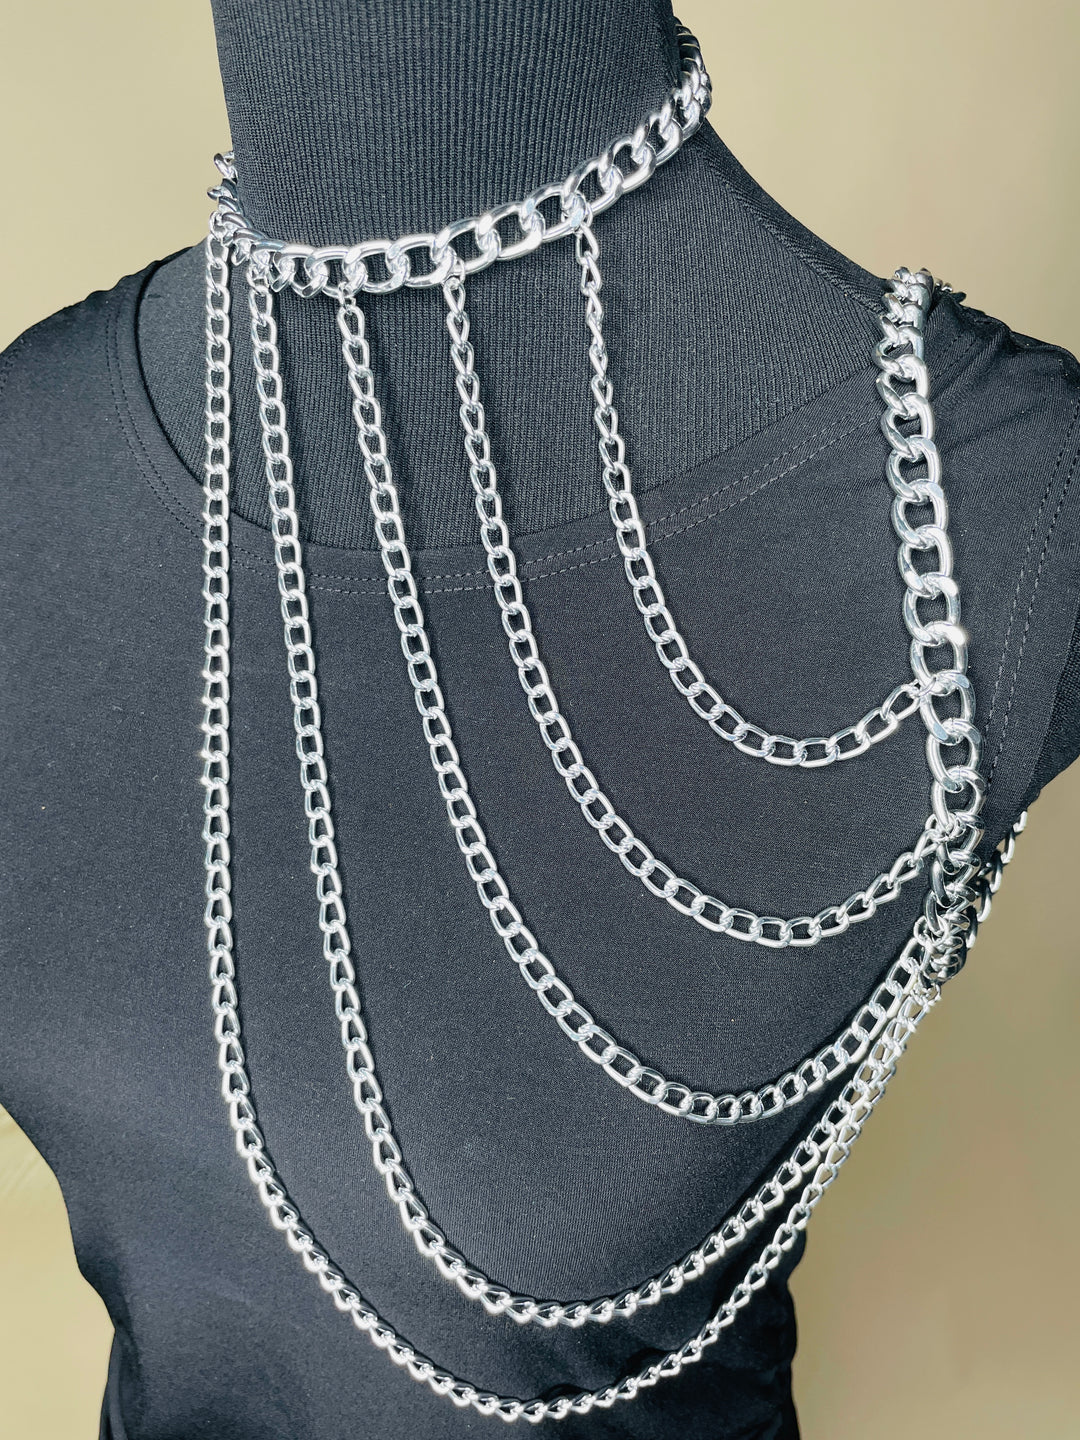 Warrior One Shoulder Body Chain Necklace : Gold and Silver